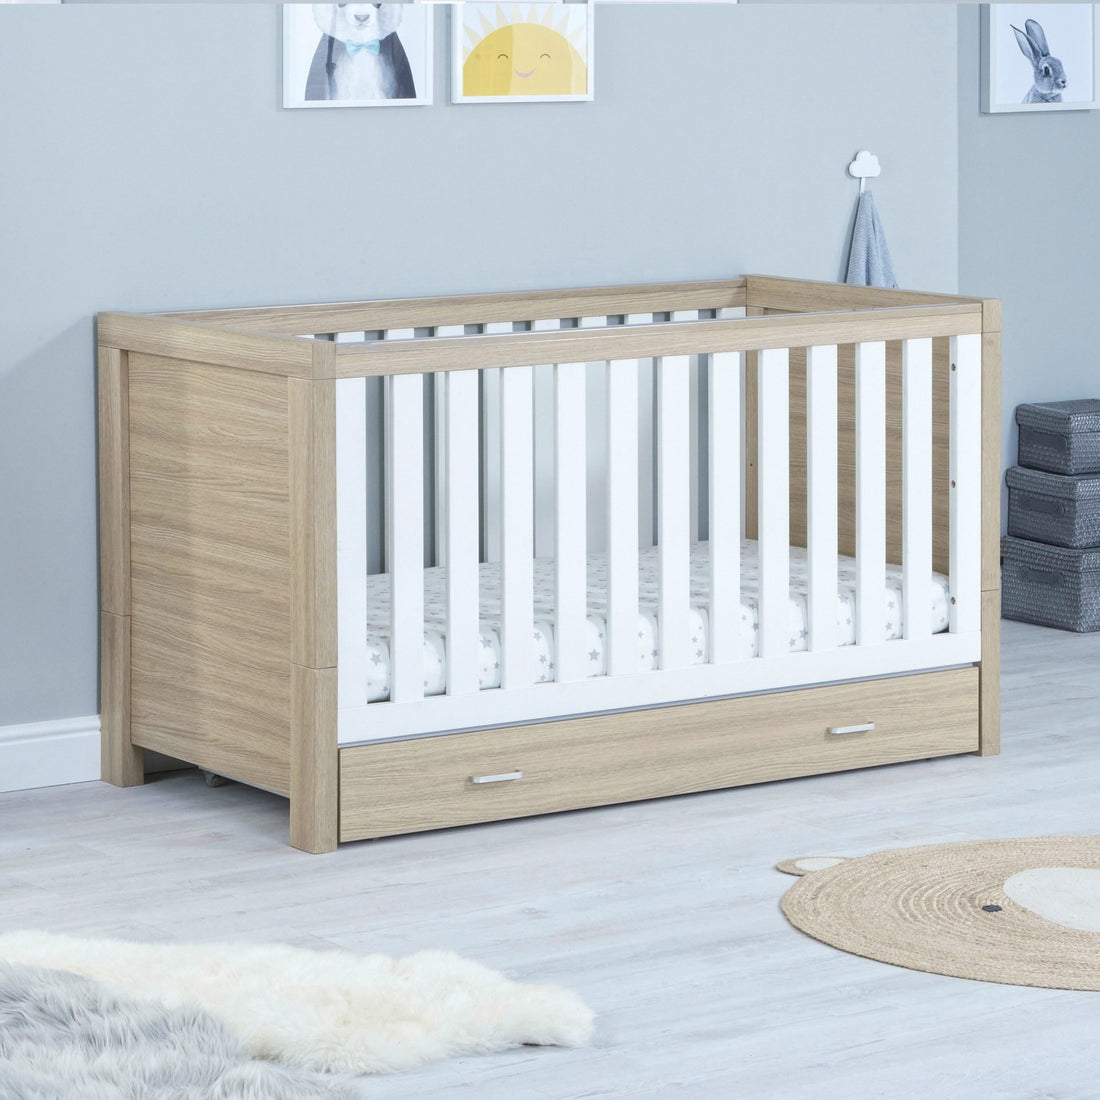 Babymore Luno 2 Piece Nursery Room Set with Drawer - Oak White - Babymore